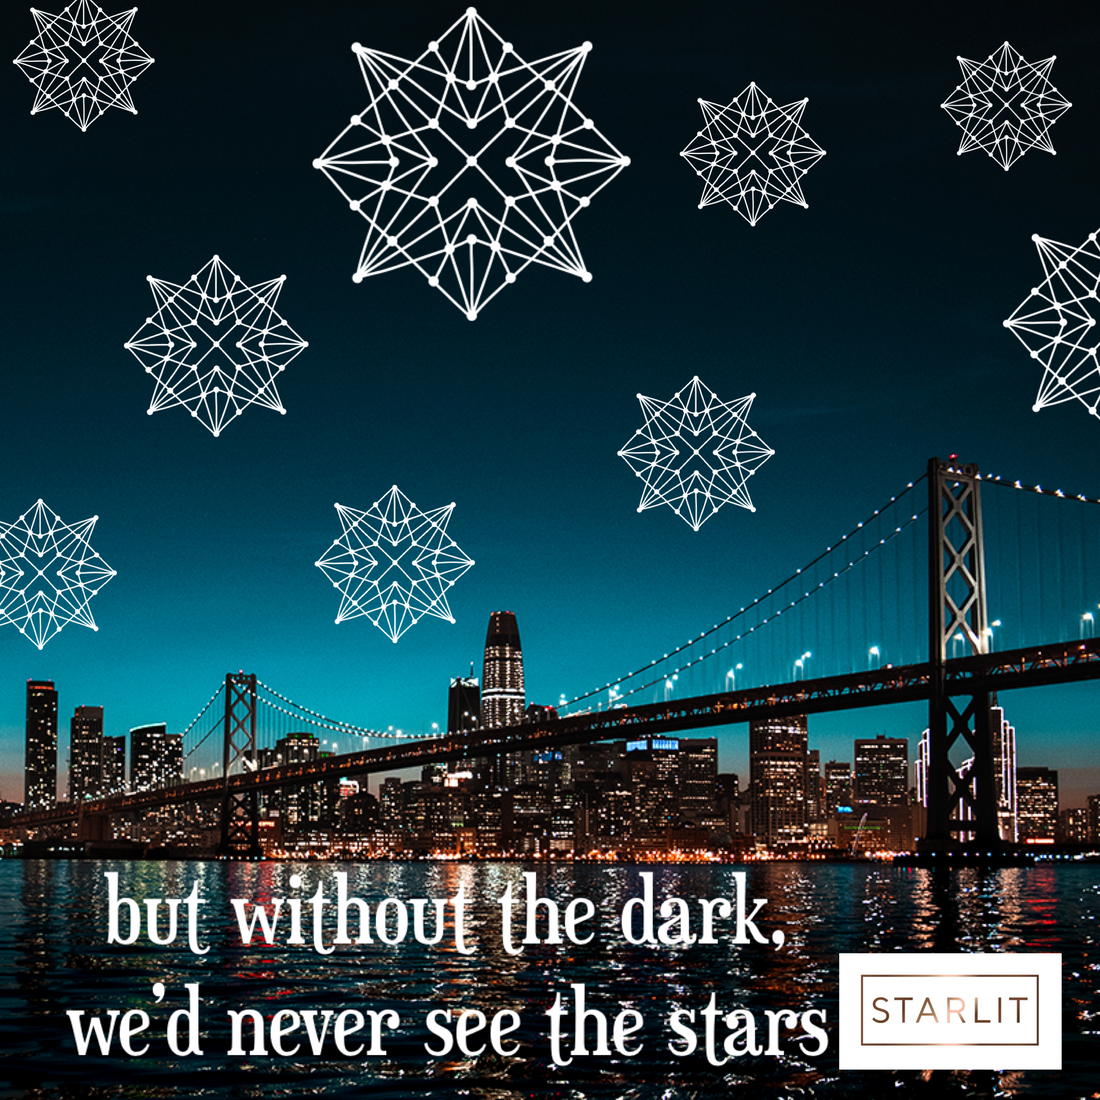 but without the dark, we'd never see the stars.